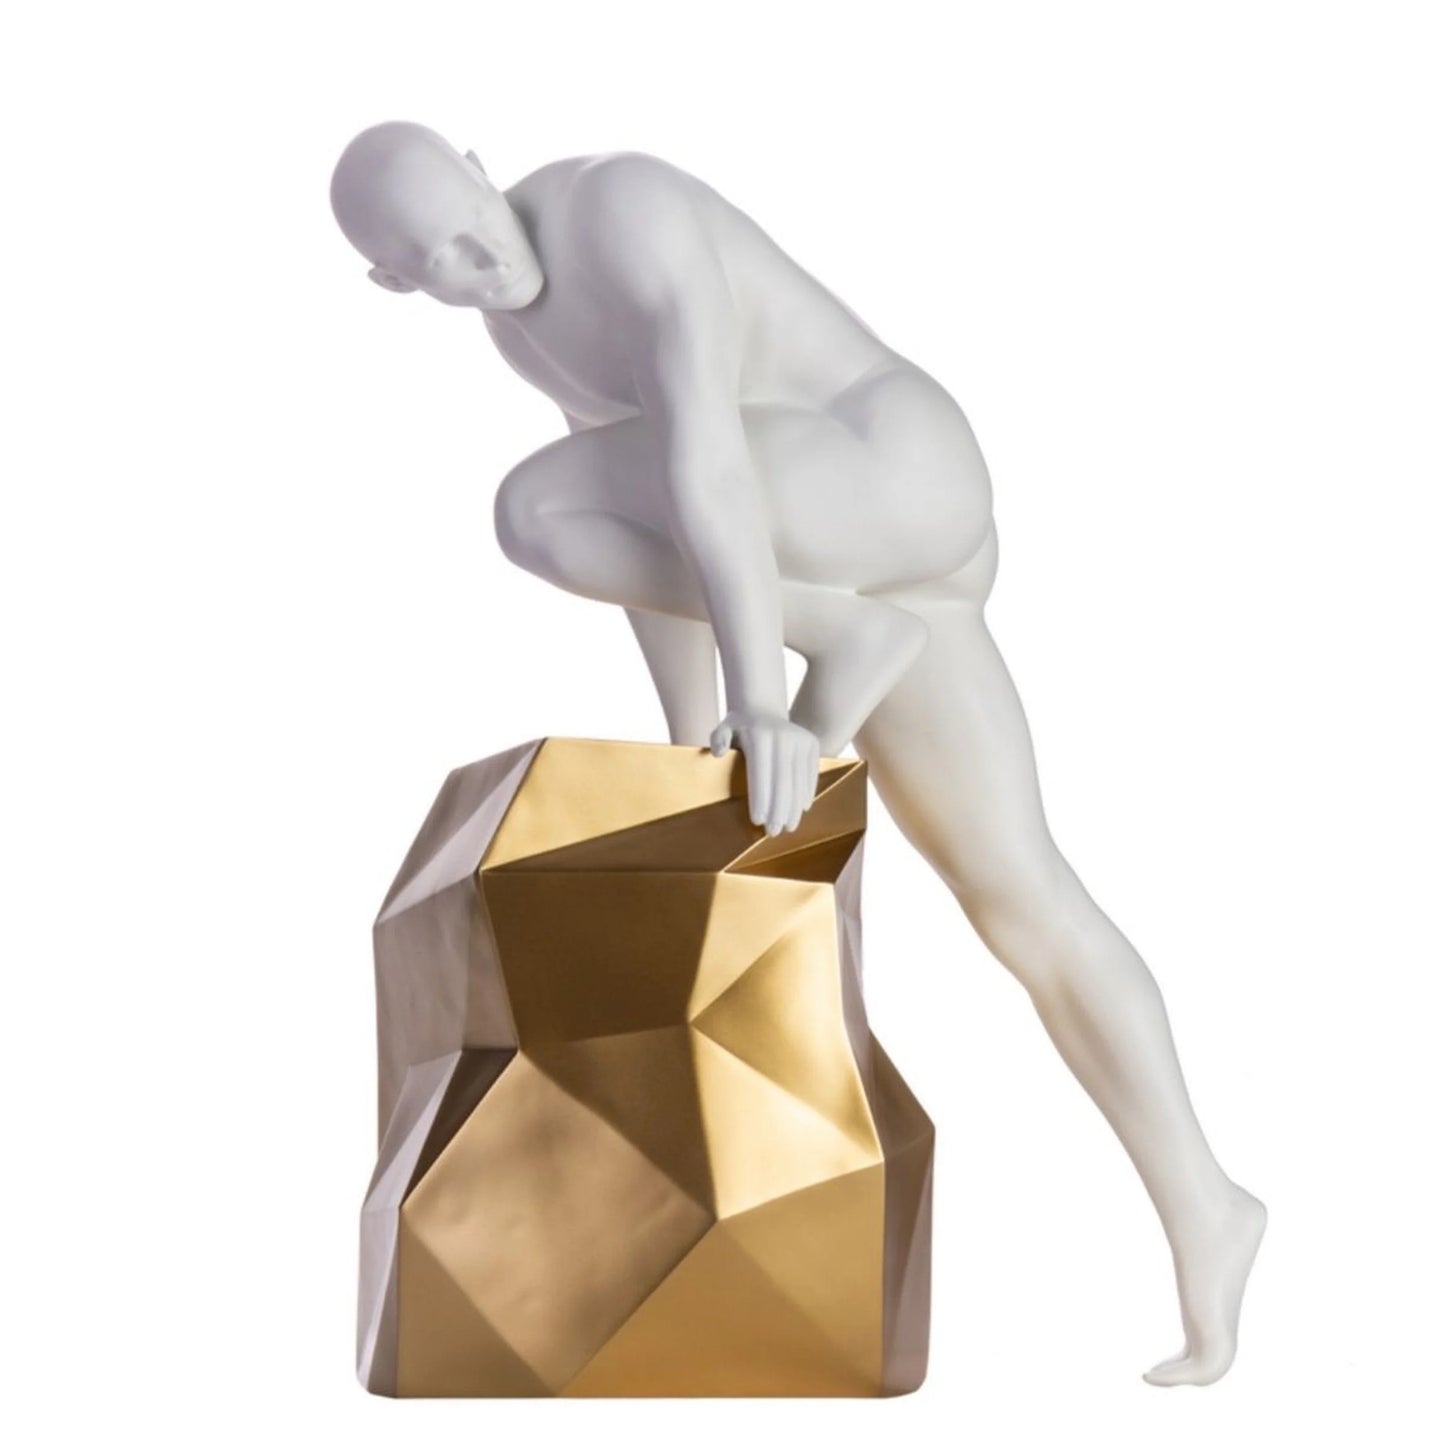 Finesse Decor The Sensuality Man Sculpture in Matte White and Gold